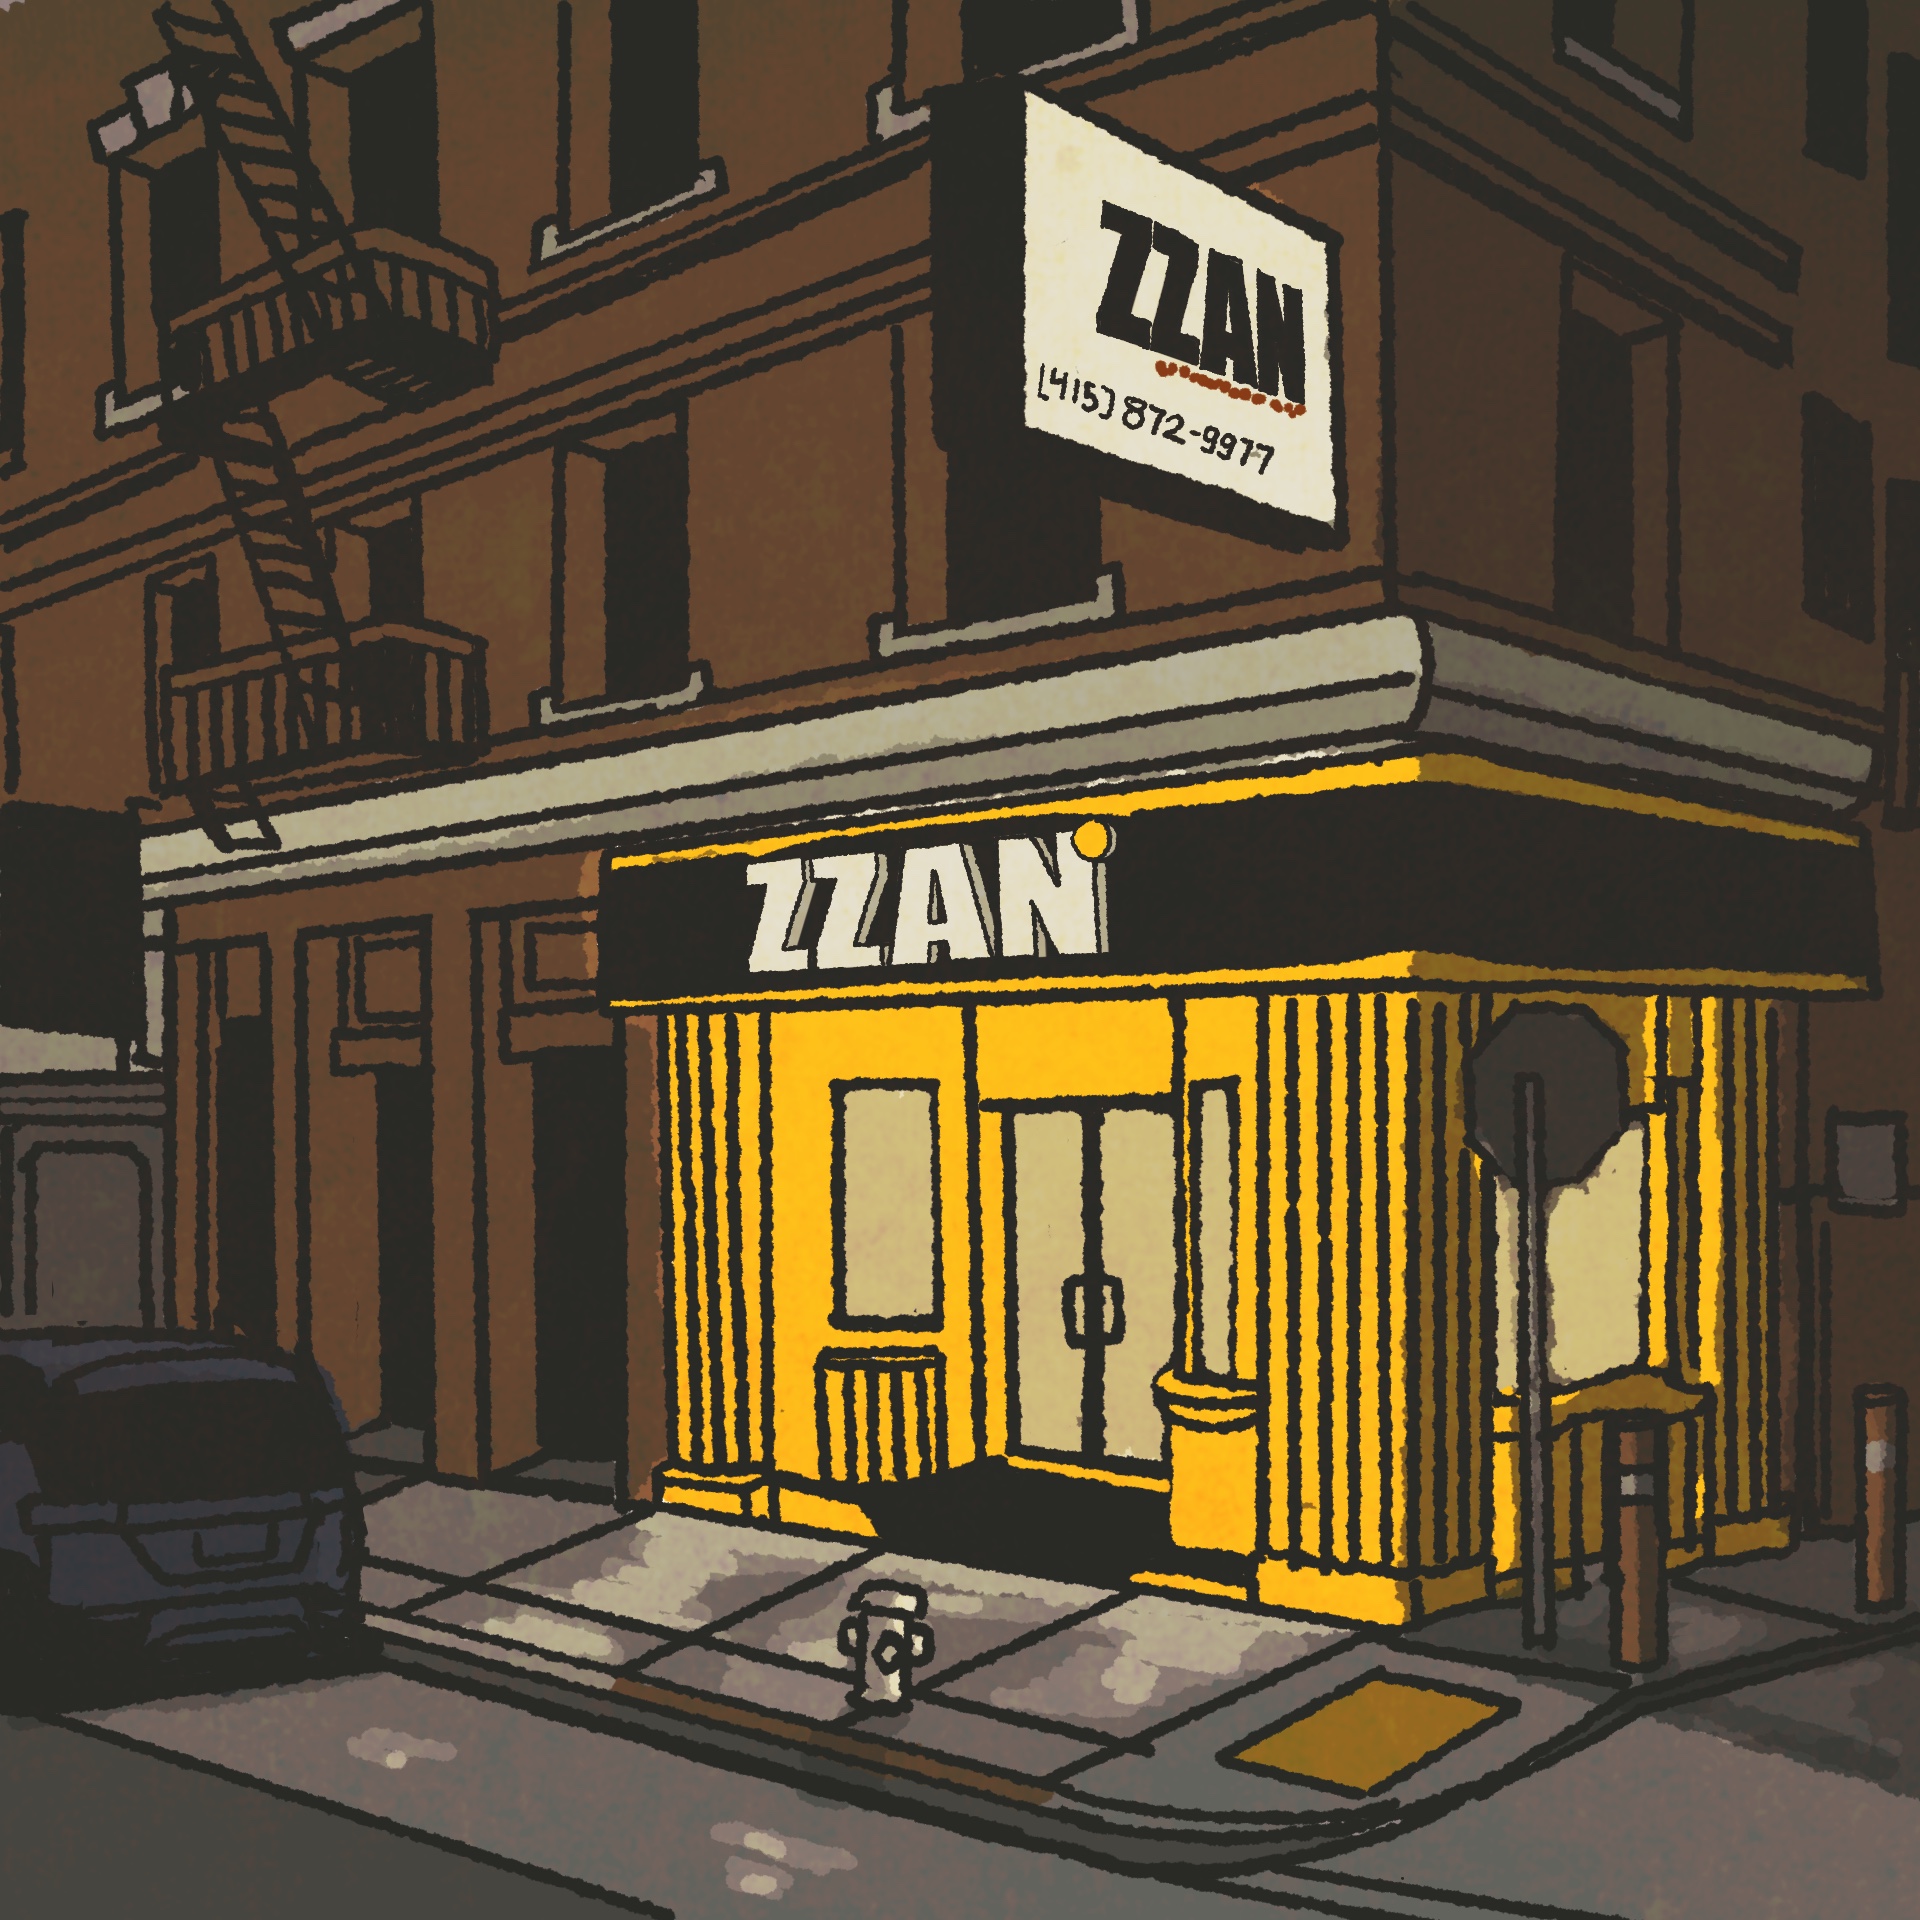 Illustration of the yellow-gold exterior of a restaurant, lit up at night. The sign reads, "ZZAN."